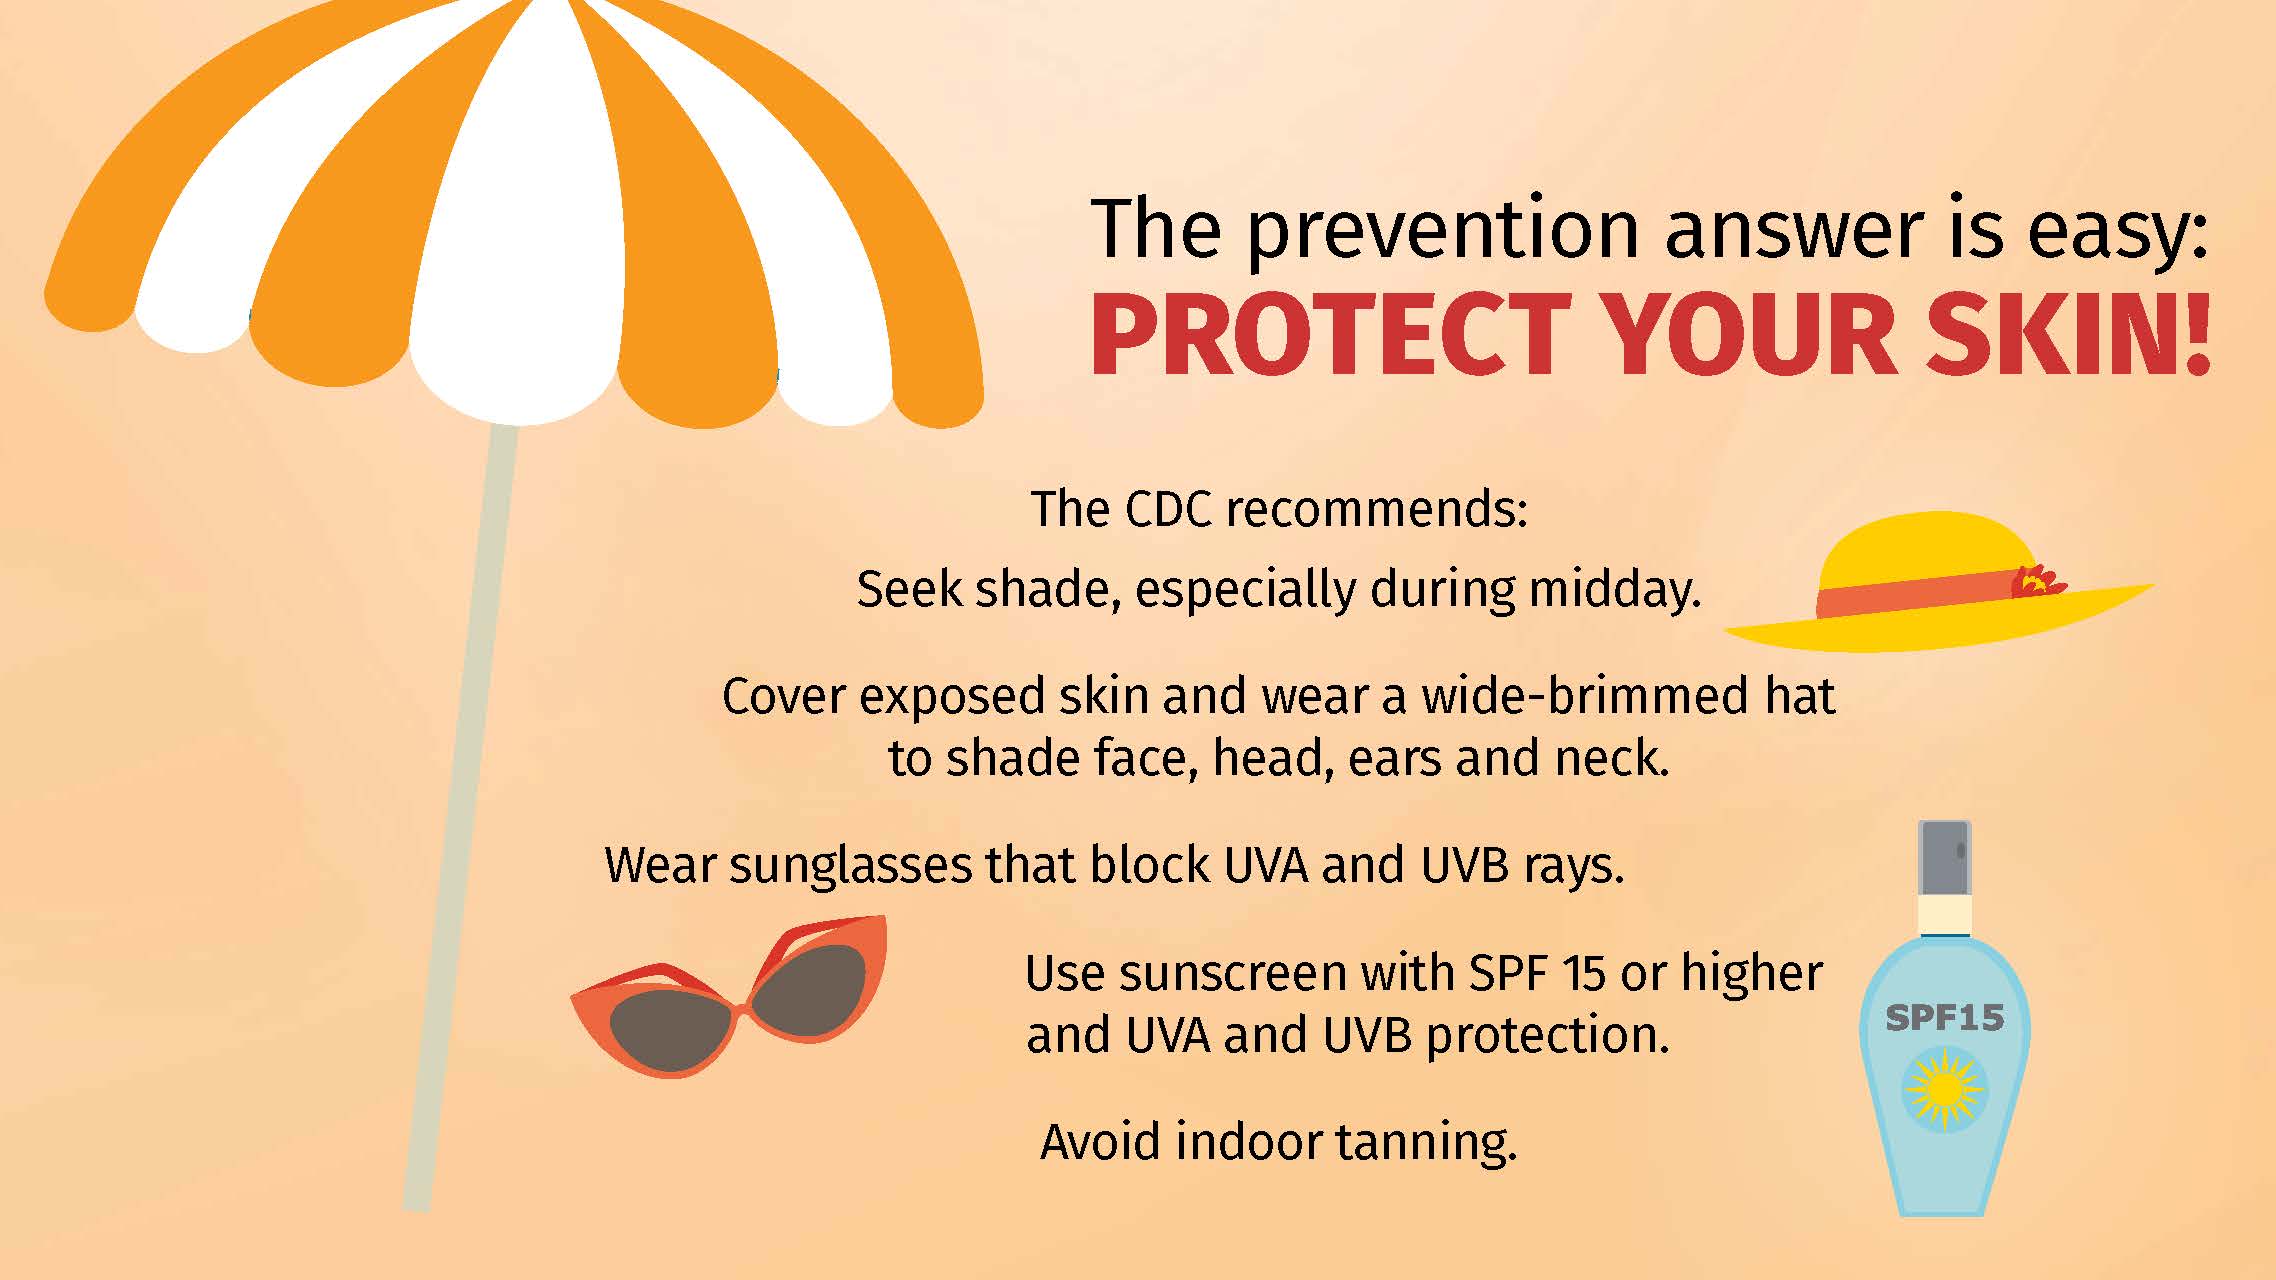 Tips for protect your skin from the sun